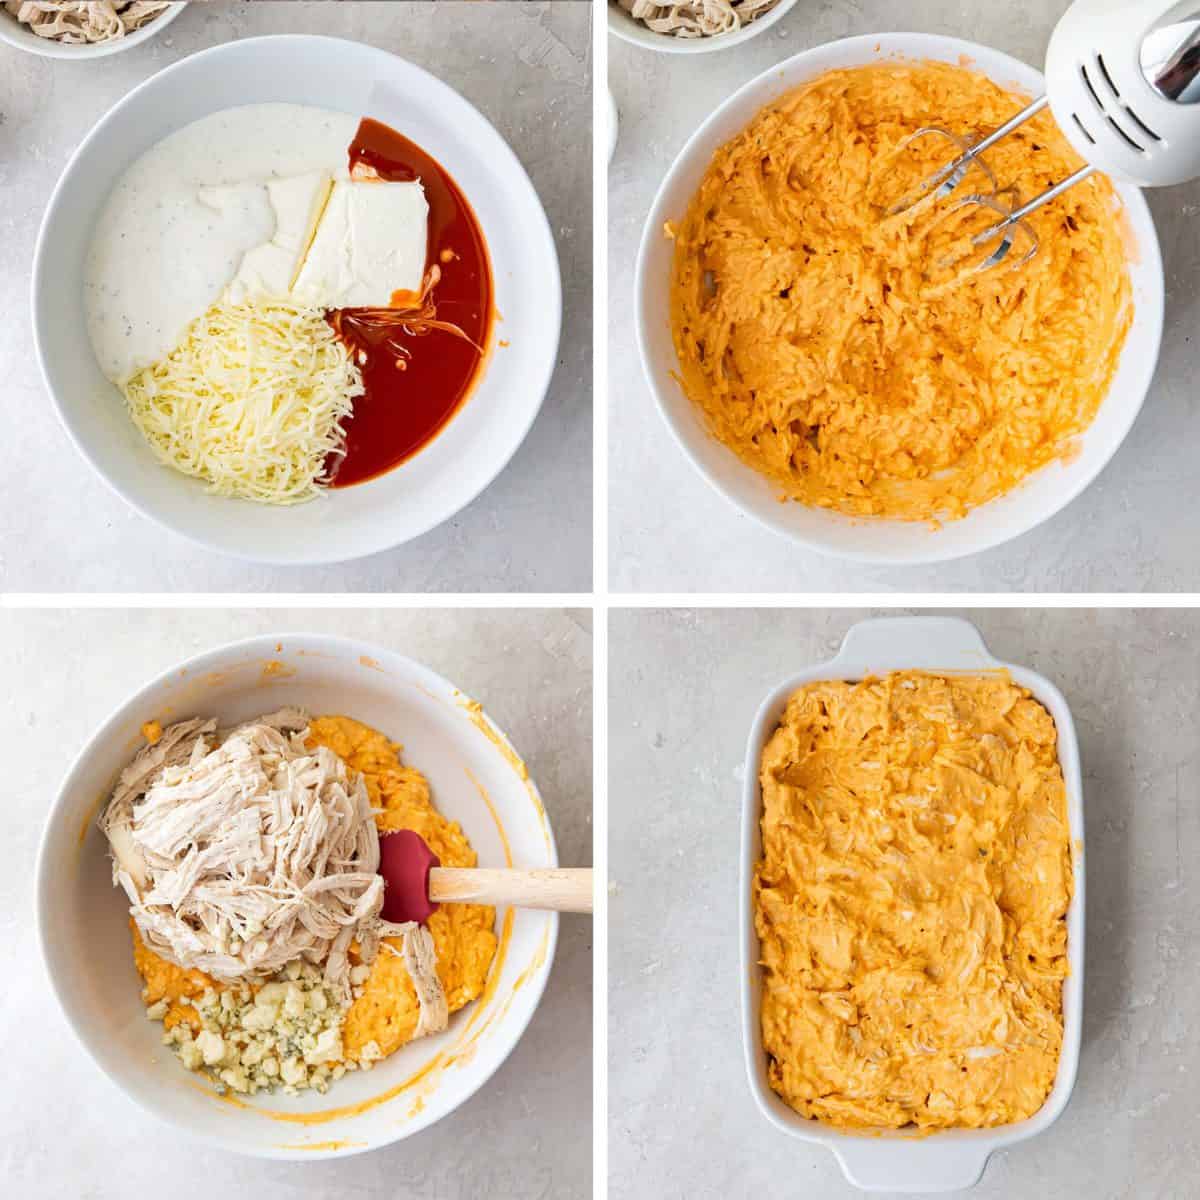 Buffalo Chicken Dip ingredients combined in a bowl and transferred to a baking dish.